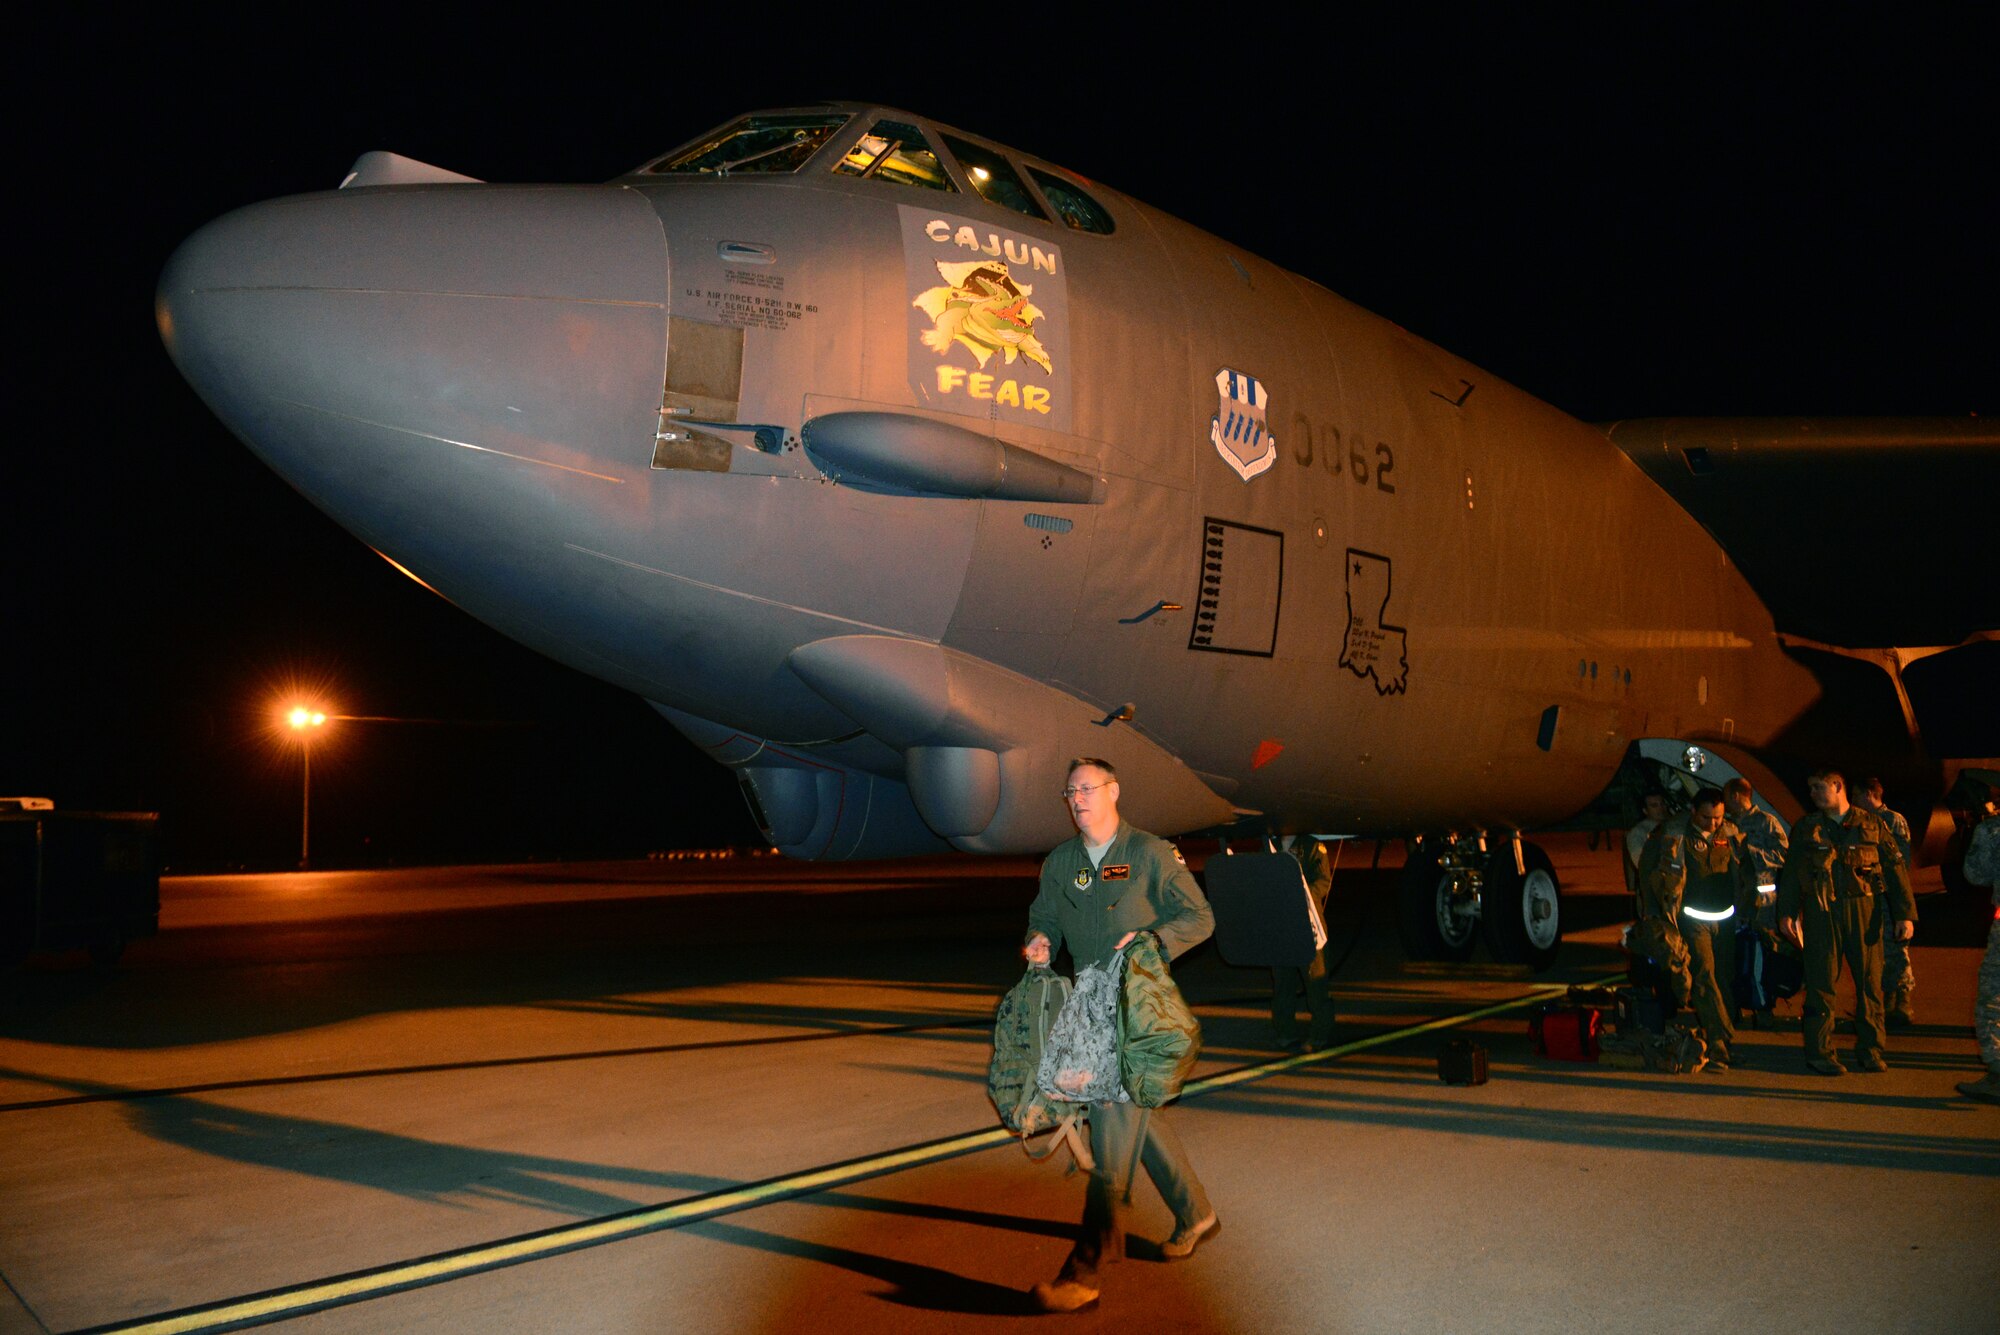 A B-52 Stratofortress crew unloads equipment following their return to Barksdale Air Force Base, La., Nov. 8, 2015, during exercise GLOBAL THUNDER 16. As part of U.S. Strategic Command’s (USSTRATCOM) Task Force 204, B-52s supports the command’s strategic deterrence and global strike missions by providing combat-ready forces capable of deploying air power to any area of the world. GLOBAL THUNDER is an annual U.S. Strategic Command training event that assesses command and control functionality in all USSTRATCOM mission areas and affords component commands a venue to evaluate their joint operational readiness. Planning for GLOBAL THUNDER 16 has been under way for more than a year and is based on a notional scenario with fictitious adversaries. USSTRATCOM, one of nine DoD unified combatant commands, relies on various task forces for the execution of its global missions, which also include space operations; cyberspace operations; joint electronic warfare; missile defense; intelligence, surveillance and reconnaissance; combating weapons of mass destruction; and analysis and targeting. (U.S. Air Force photo by Airman 1st Class Luke Hill)